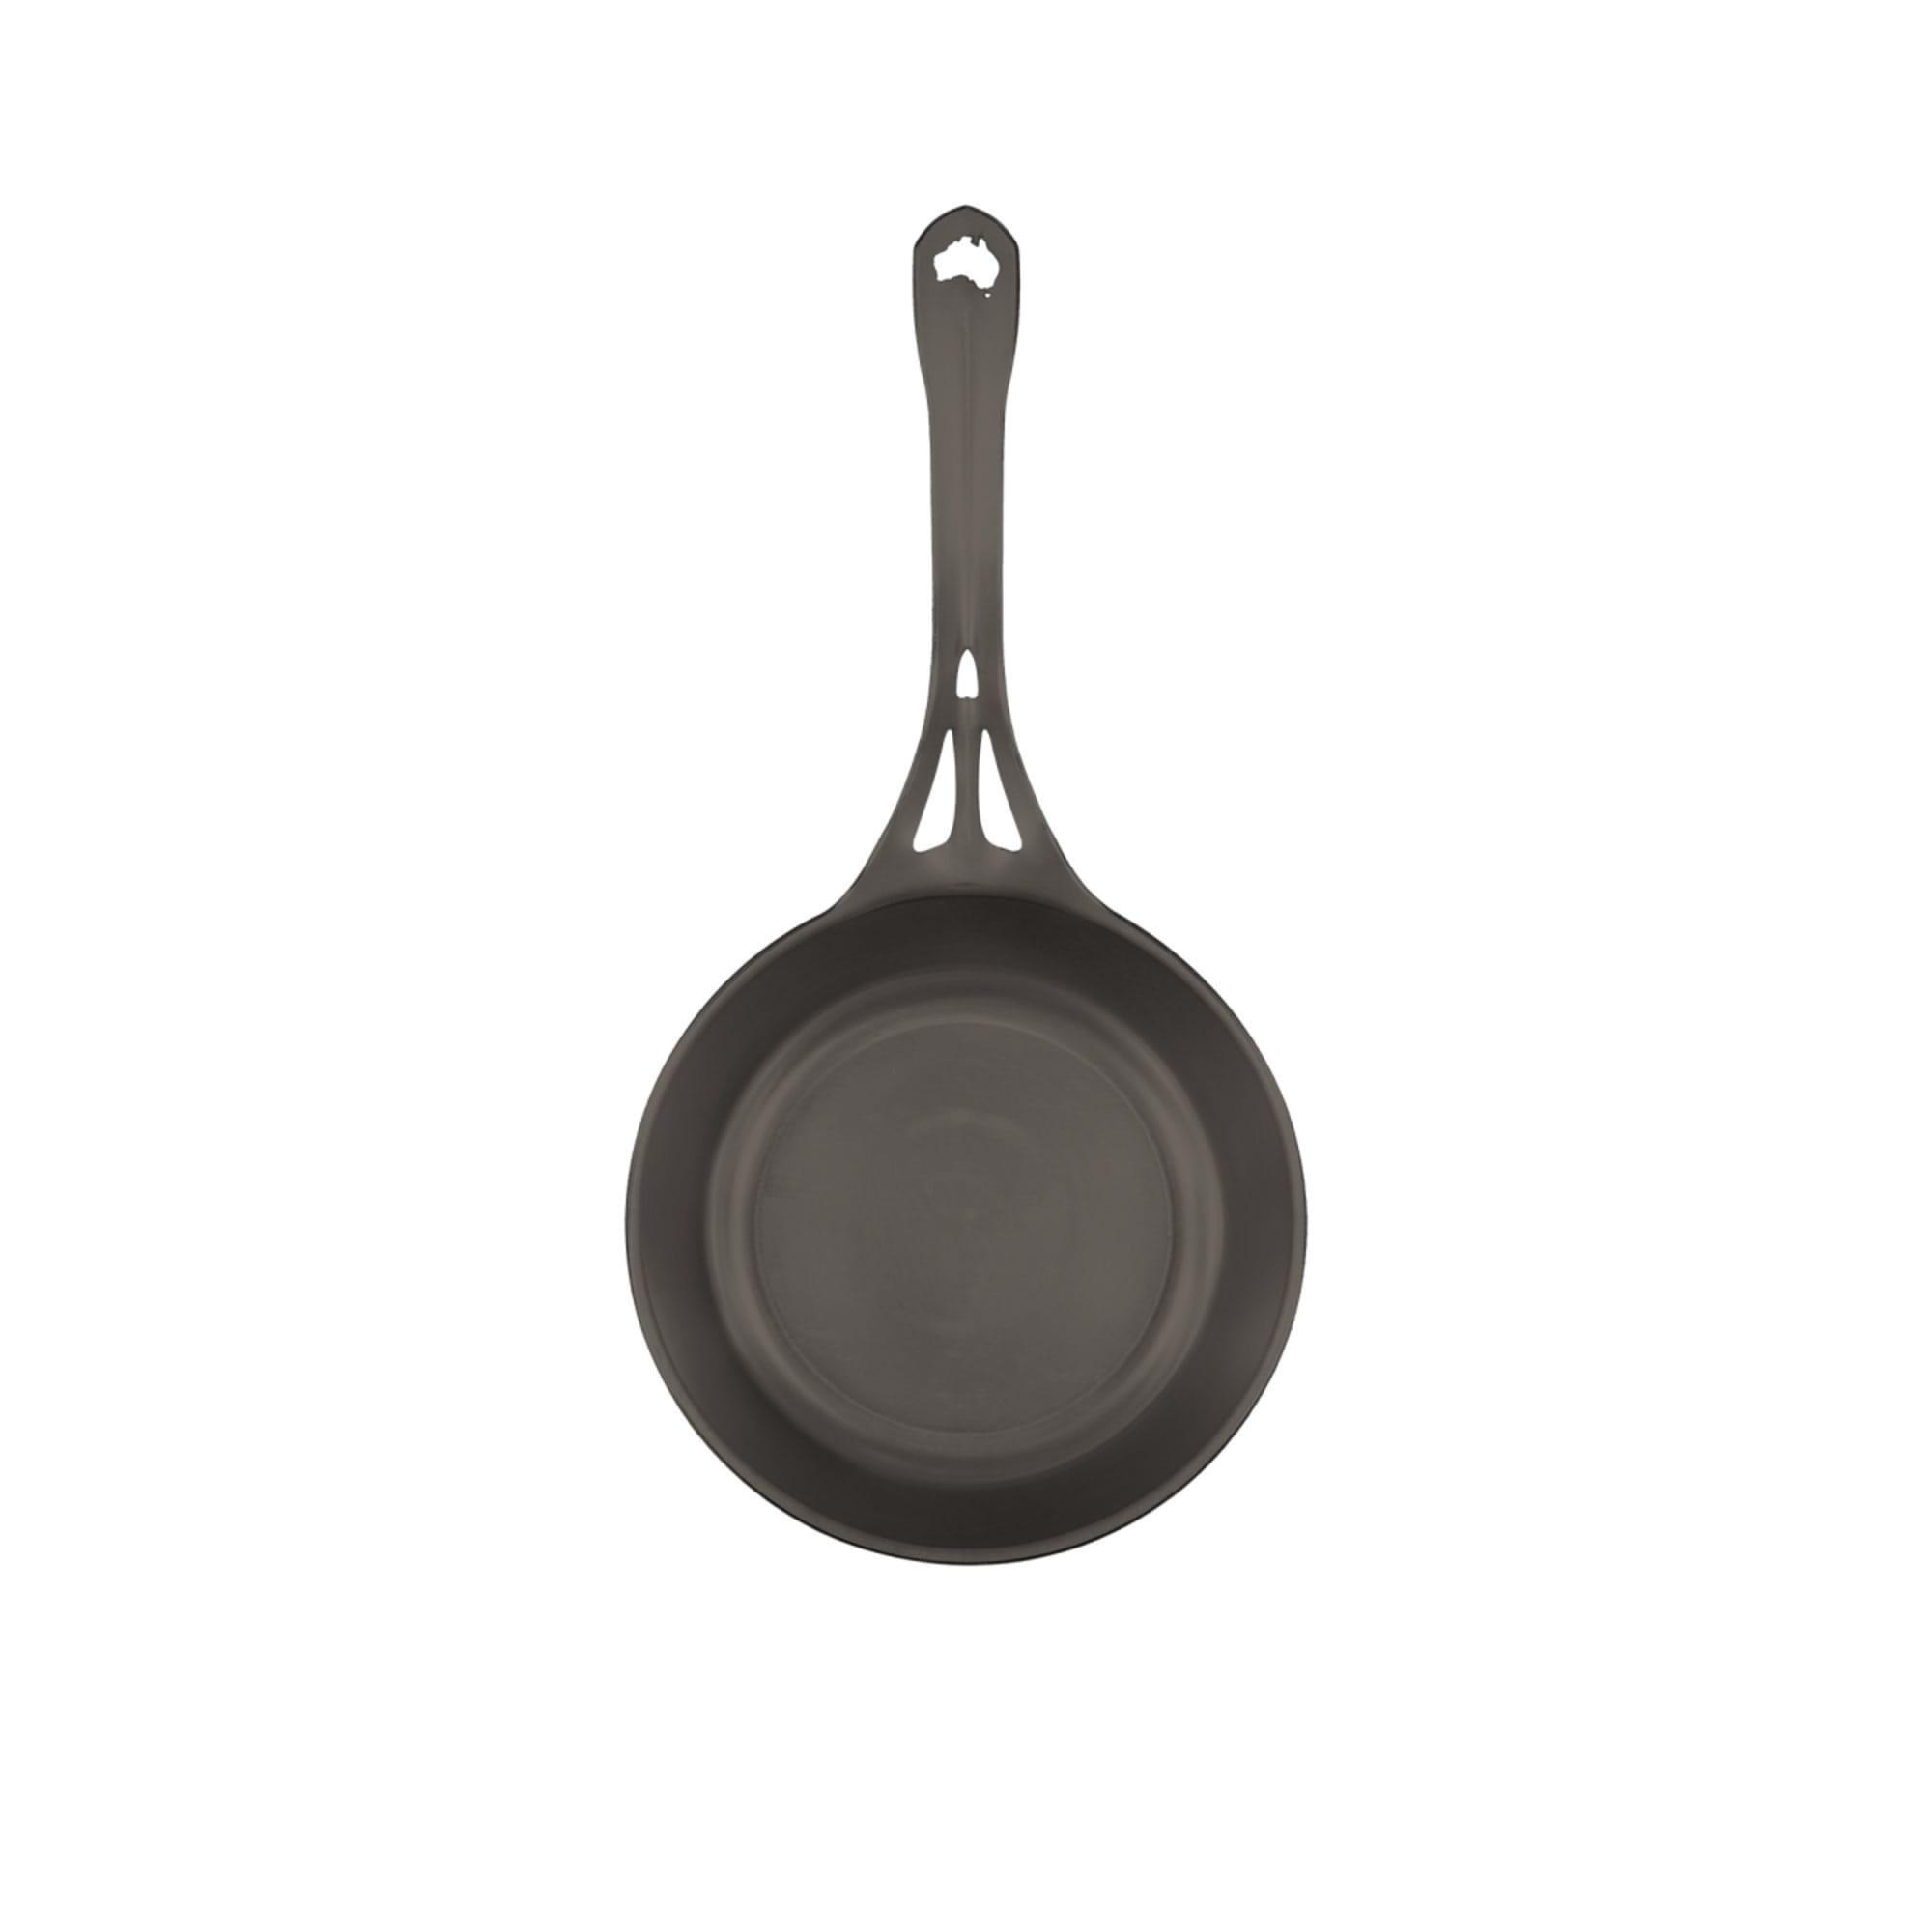 Solidteknics AUS-ION Sauteuse with Quenched Finish 22cm - 1.75L Image 2